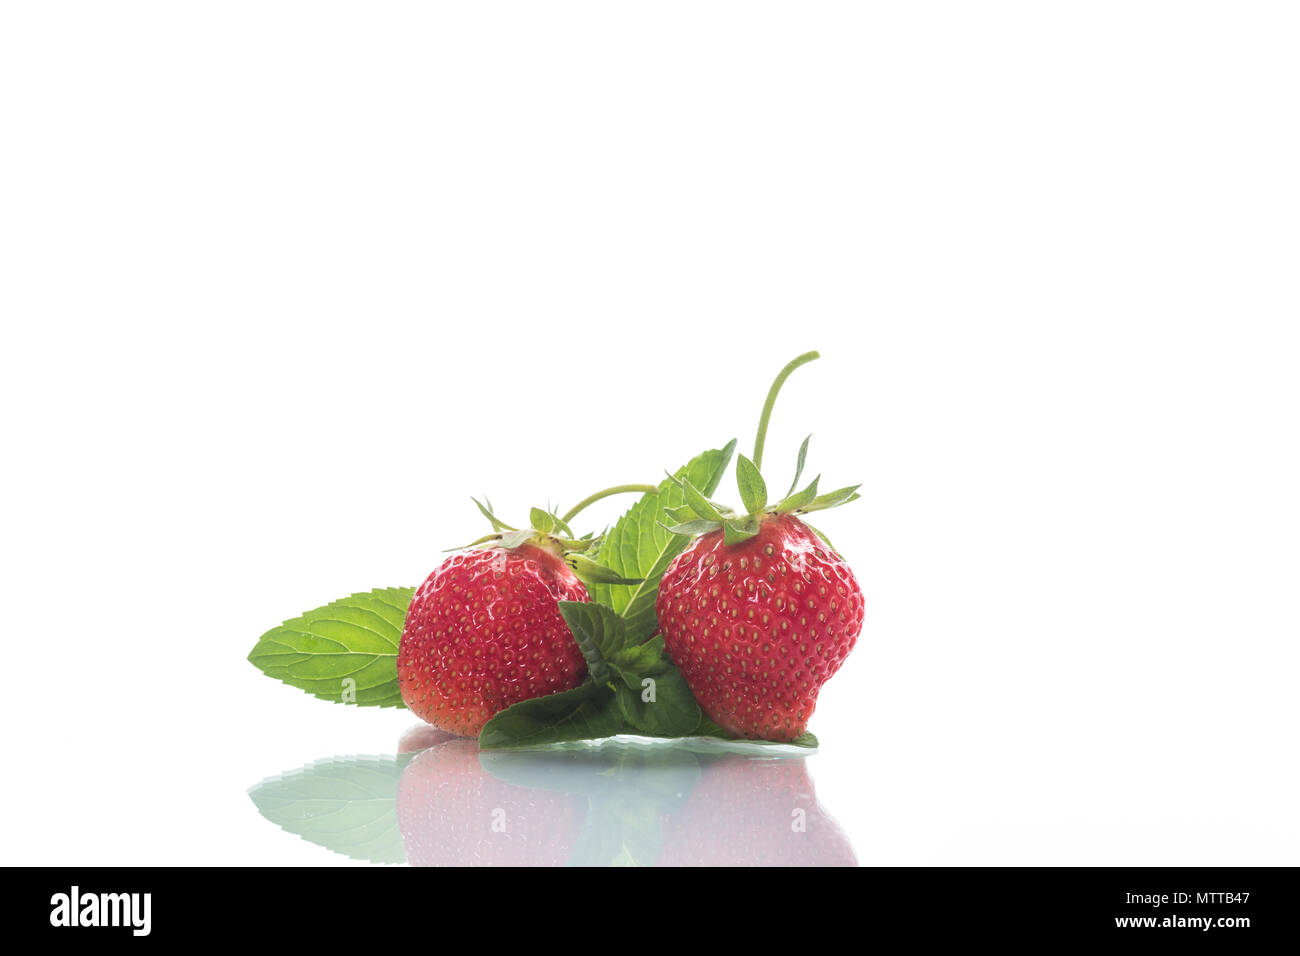 ripe red organic strawberry on a white background Stock Photo